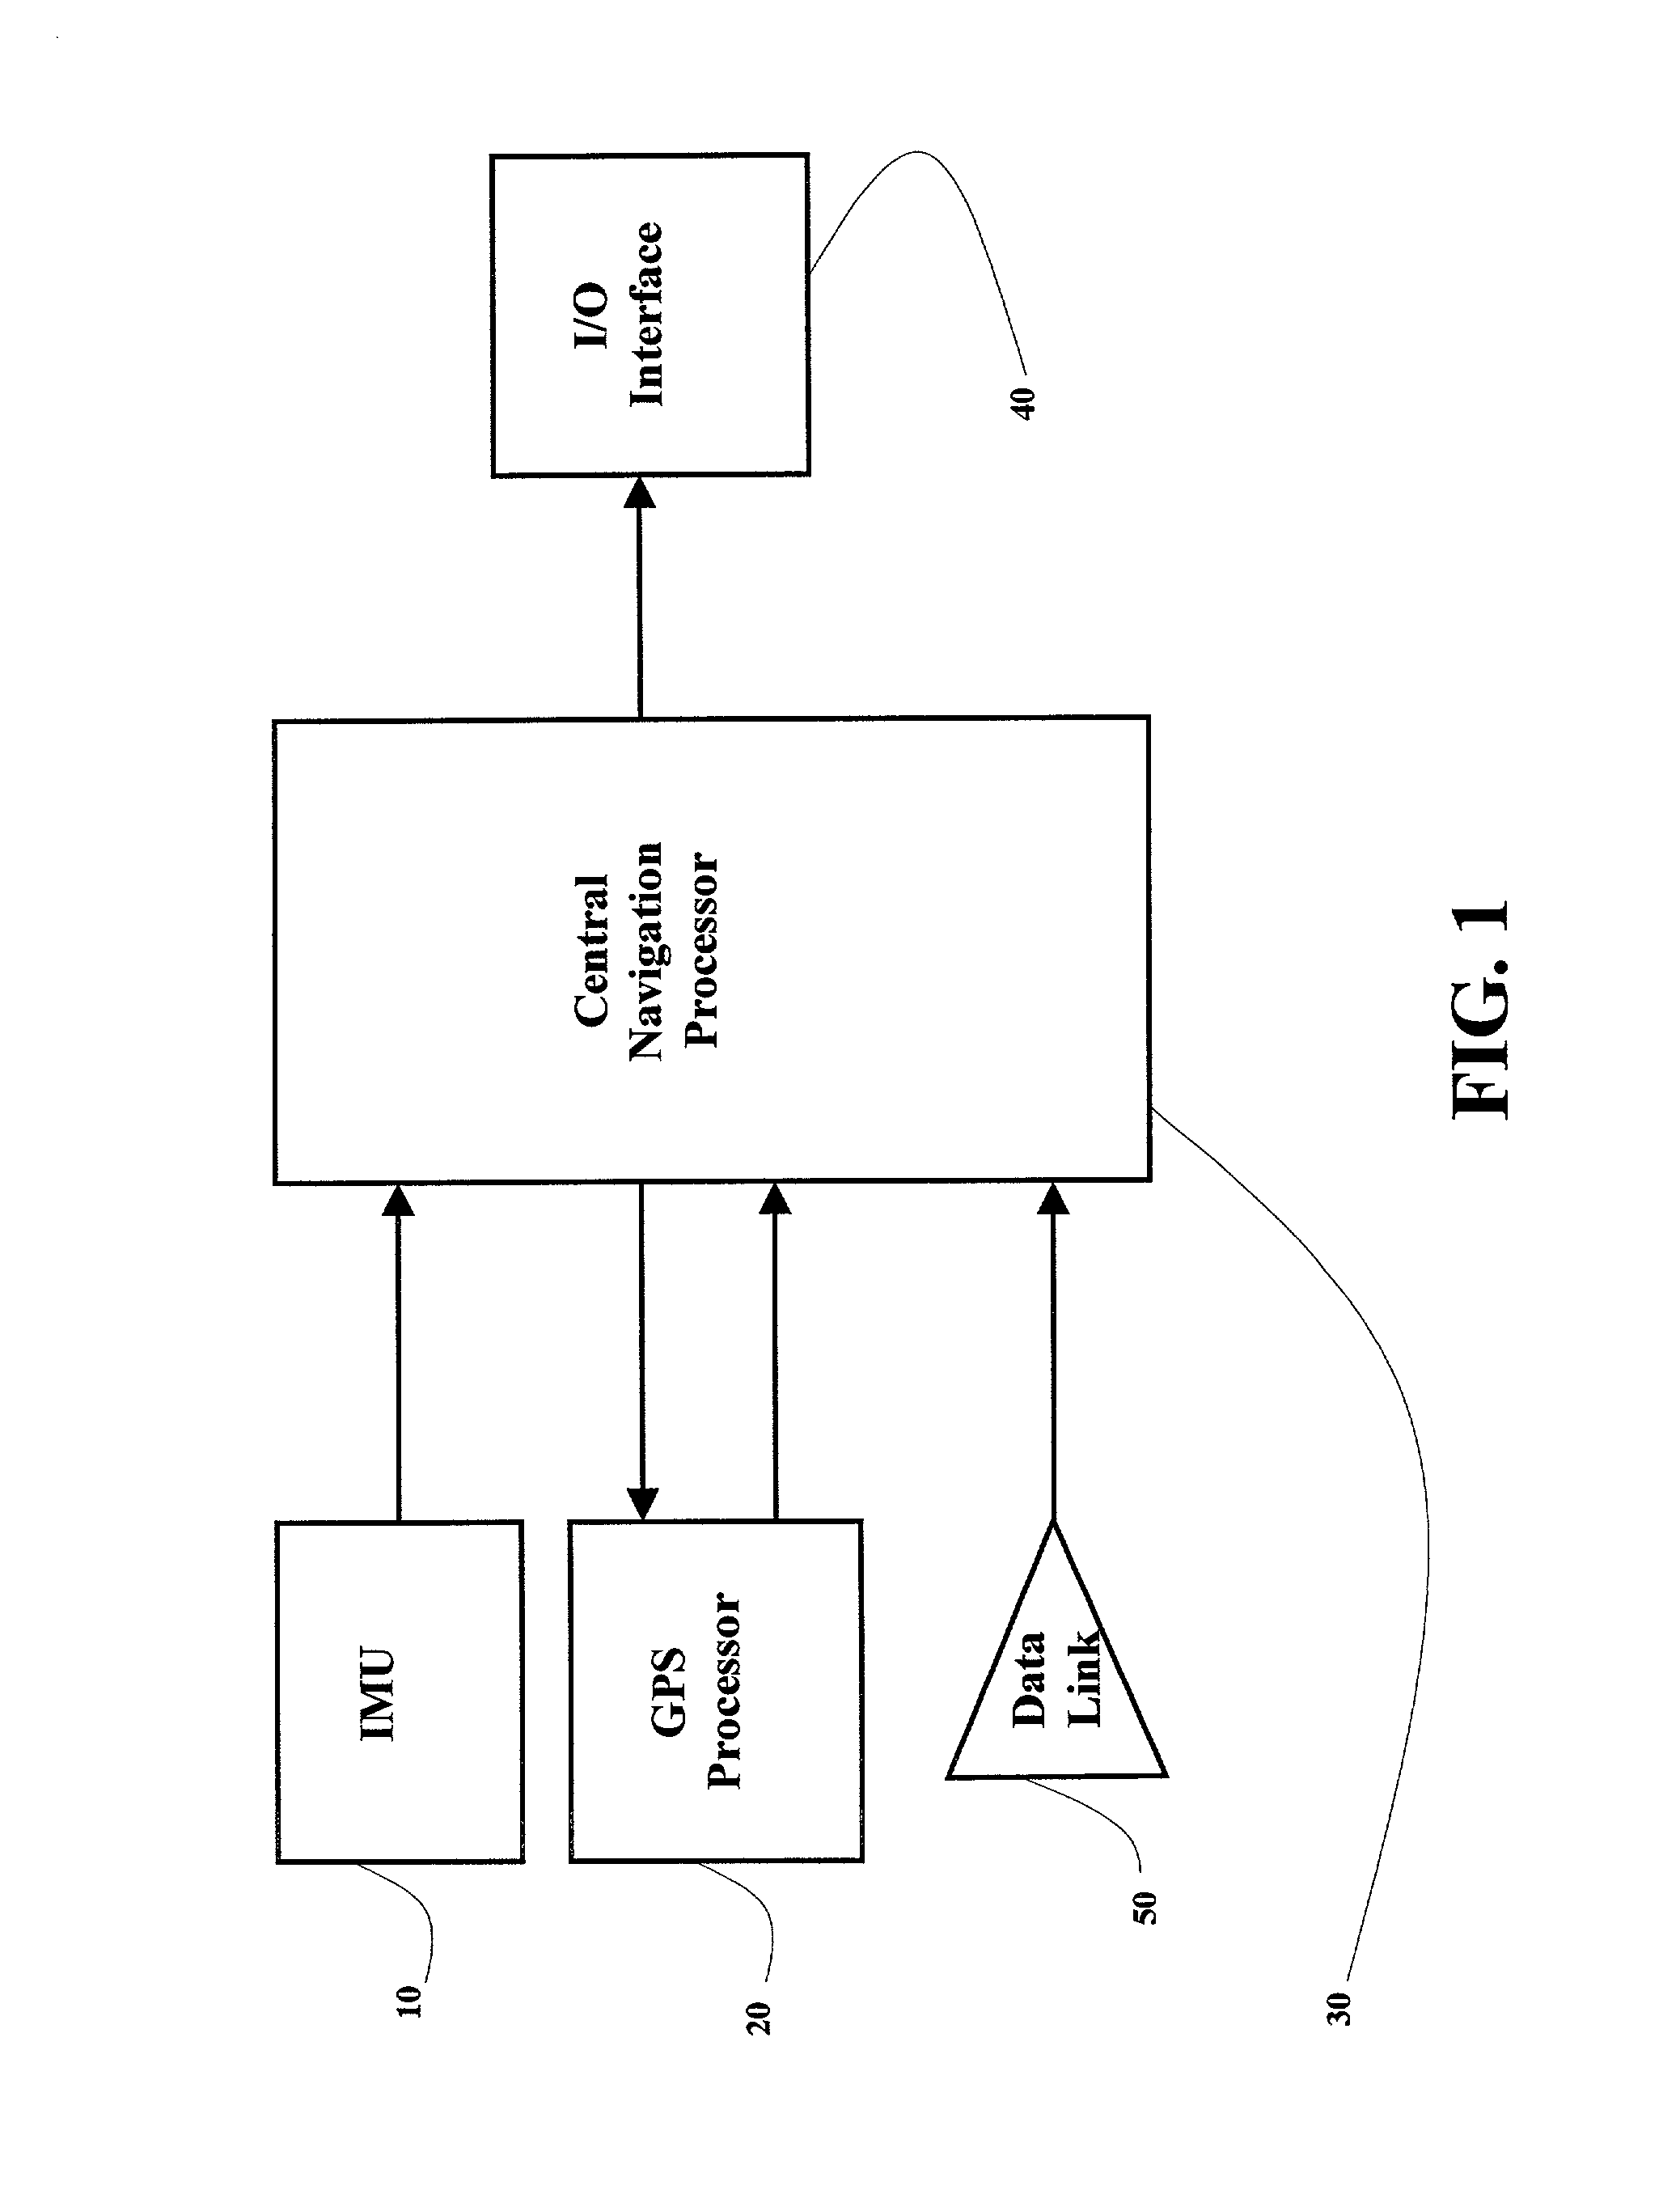 Fully-coupled vehicle positioning method and system thereof